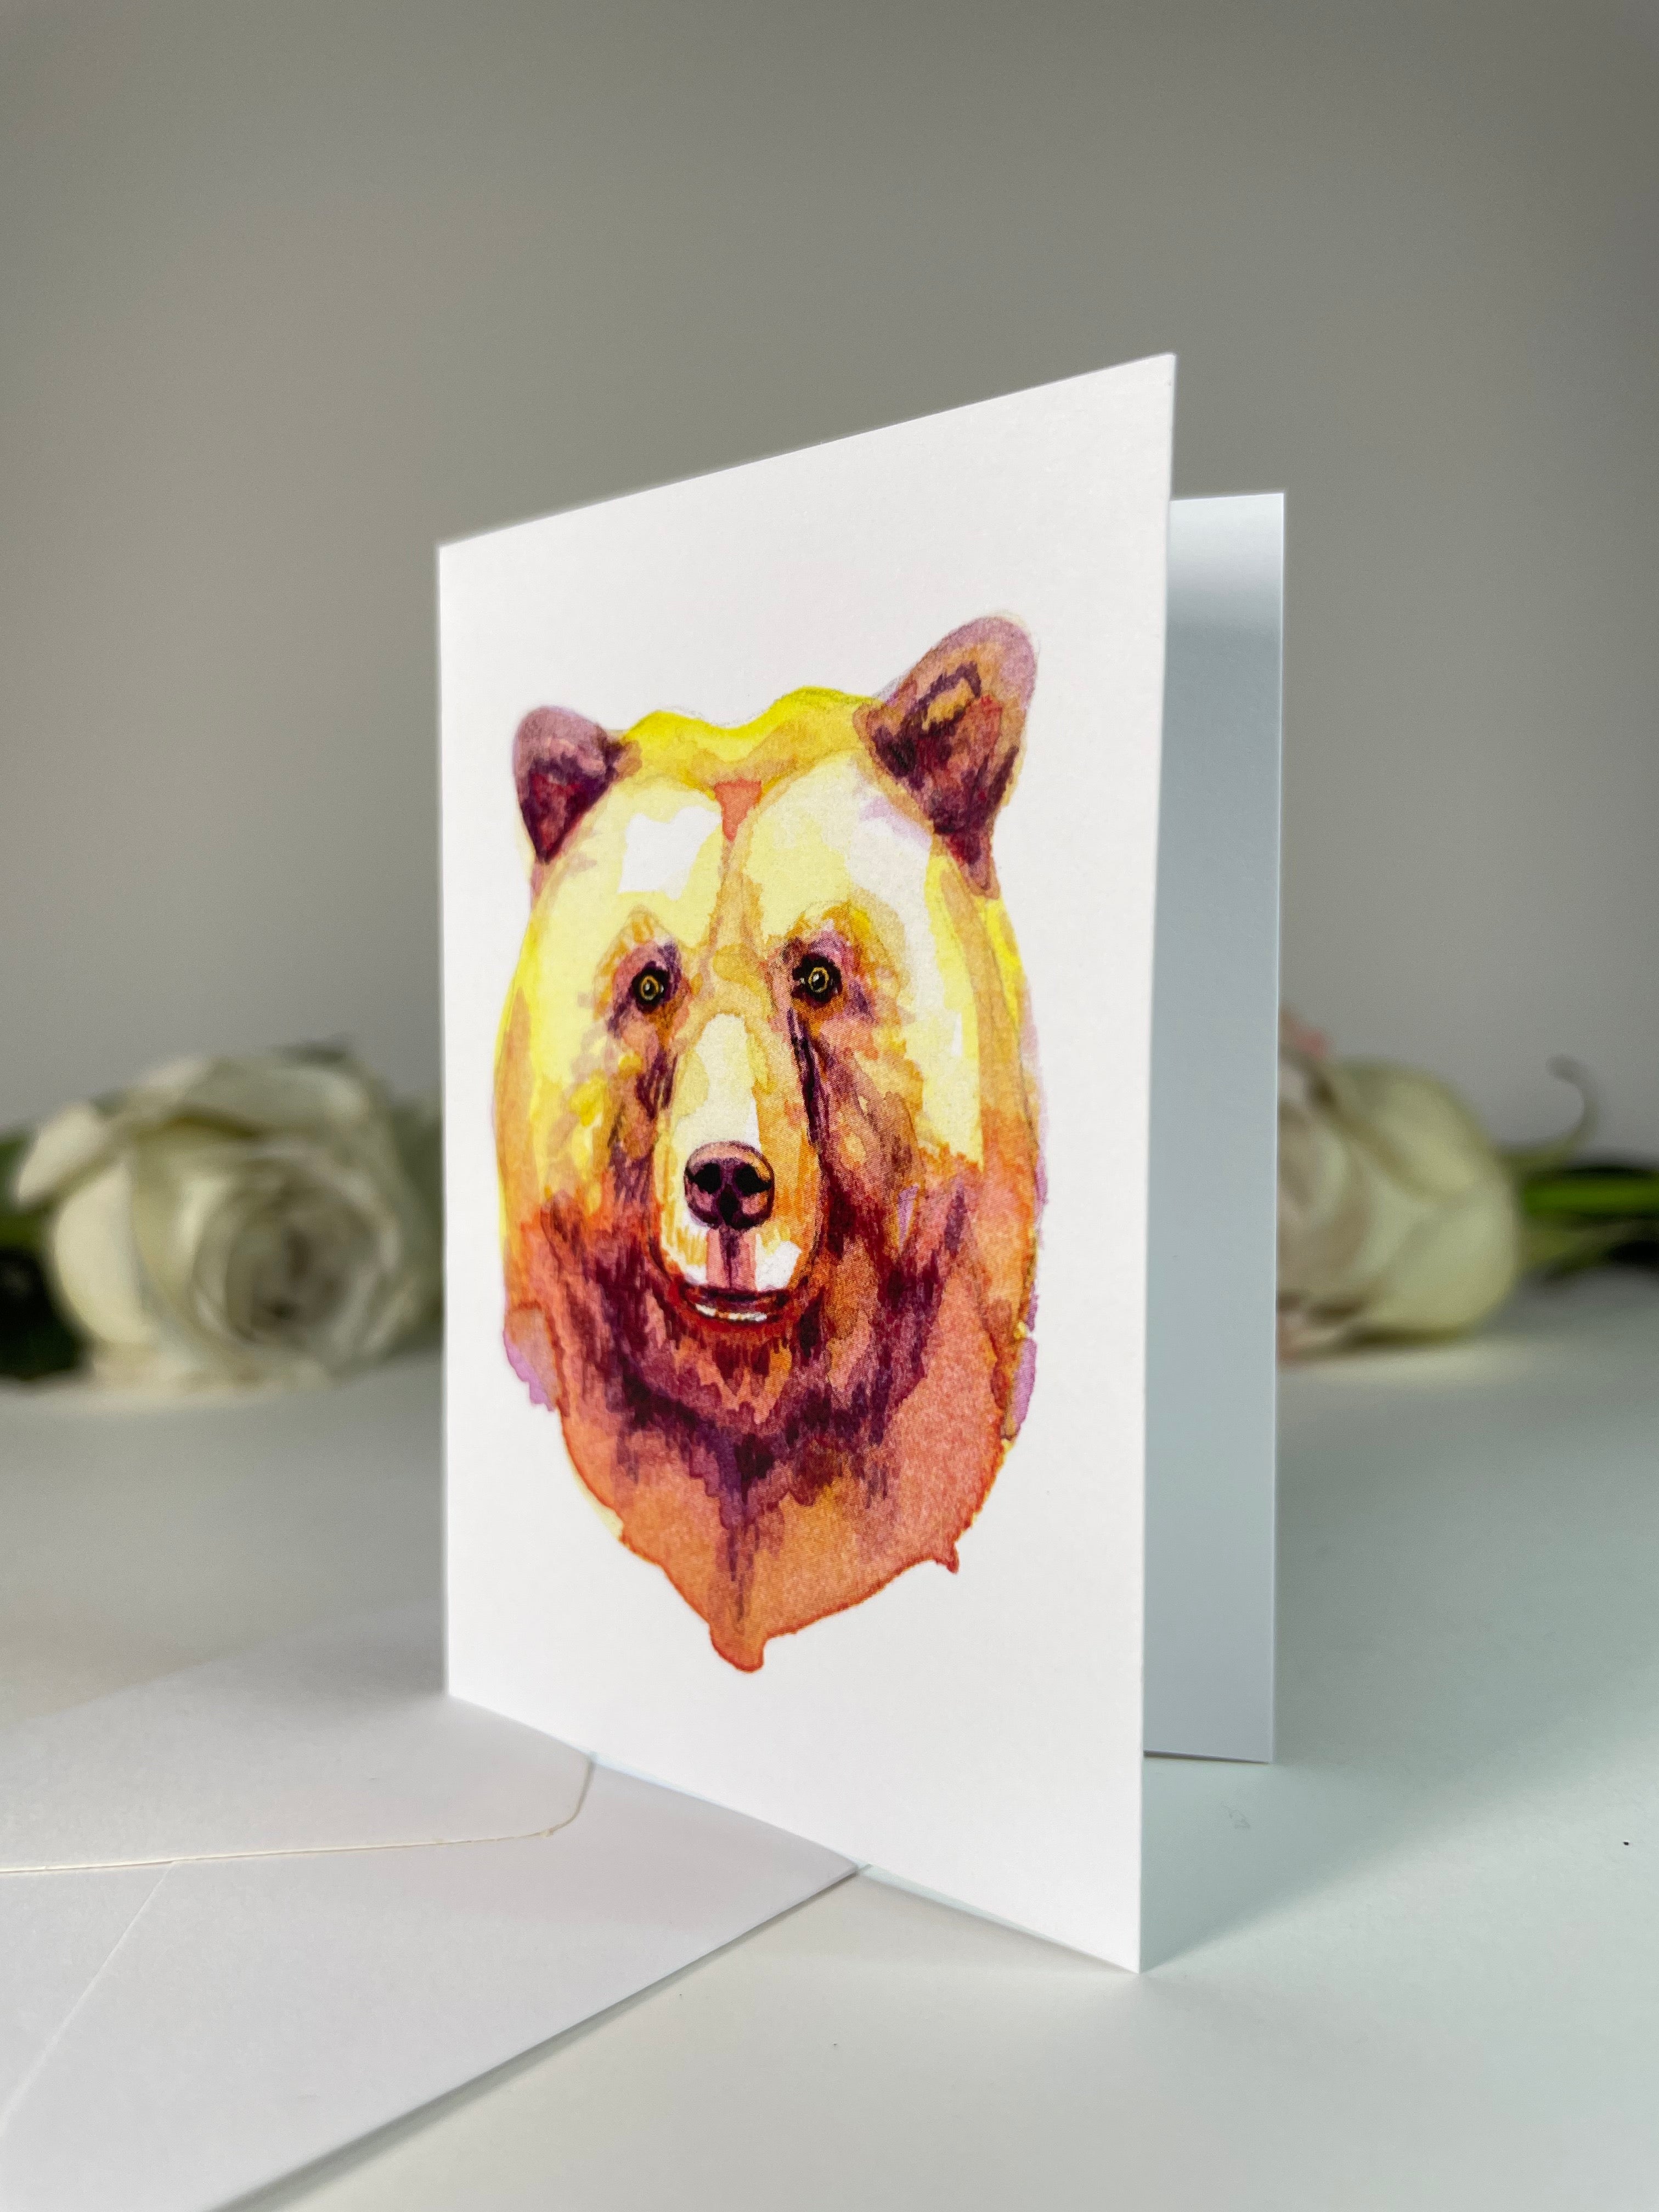 "The Bear Behind The Curtain" Greeting Card